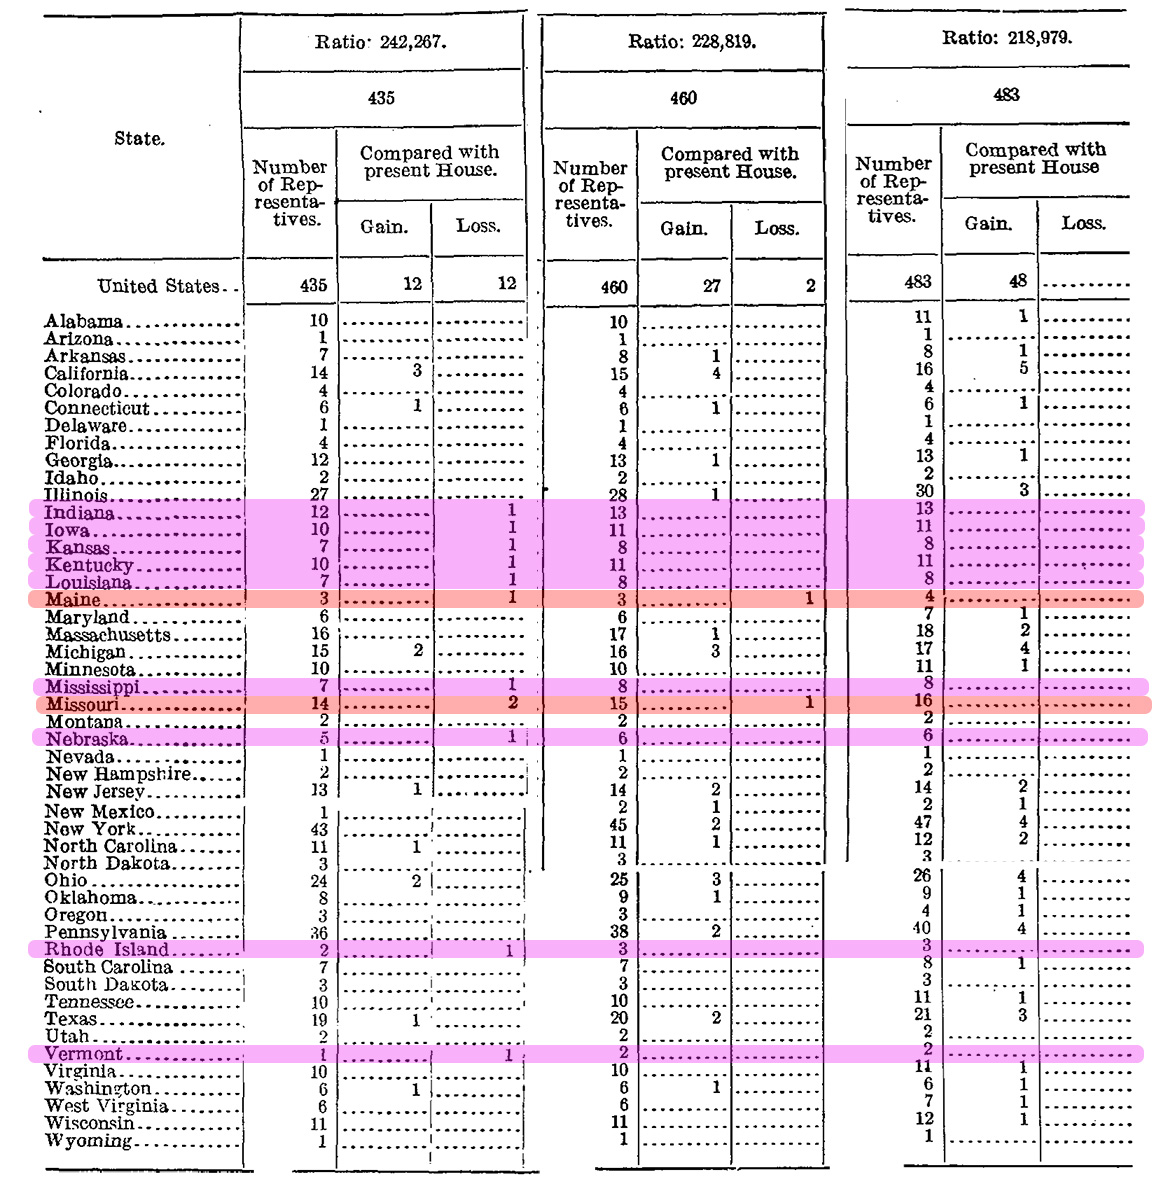 tables showing apportionments by states for Houses sized 435, 460, and 483